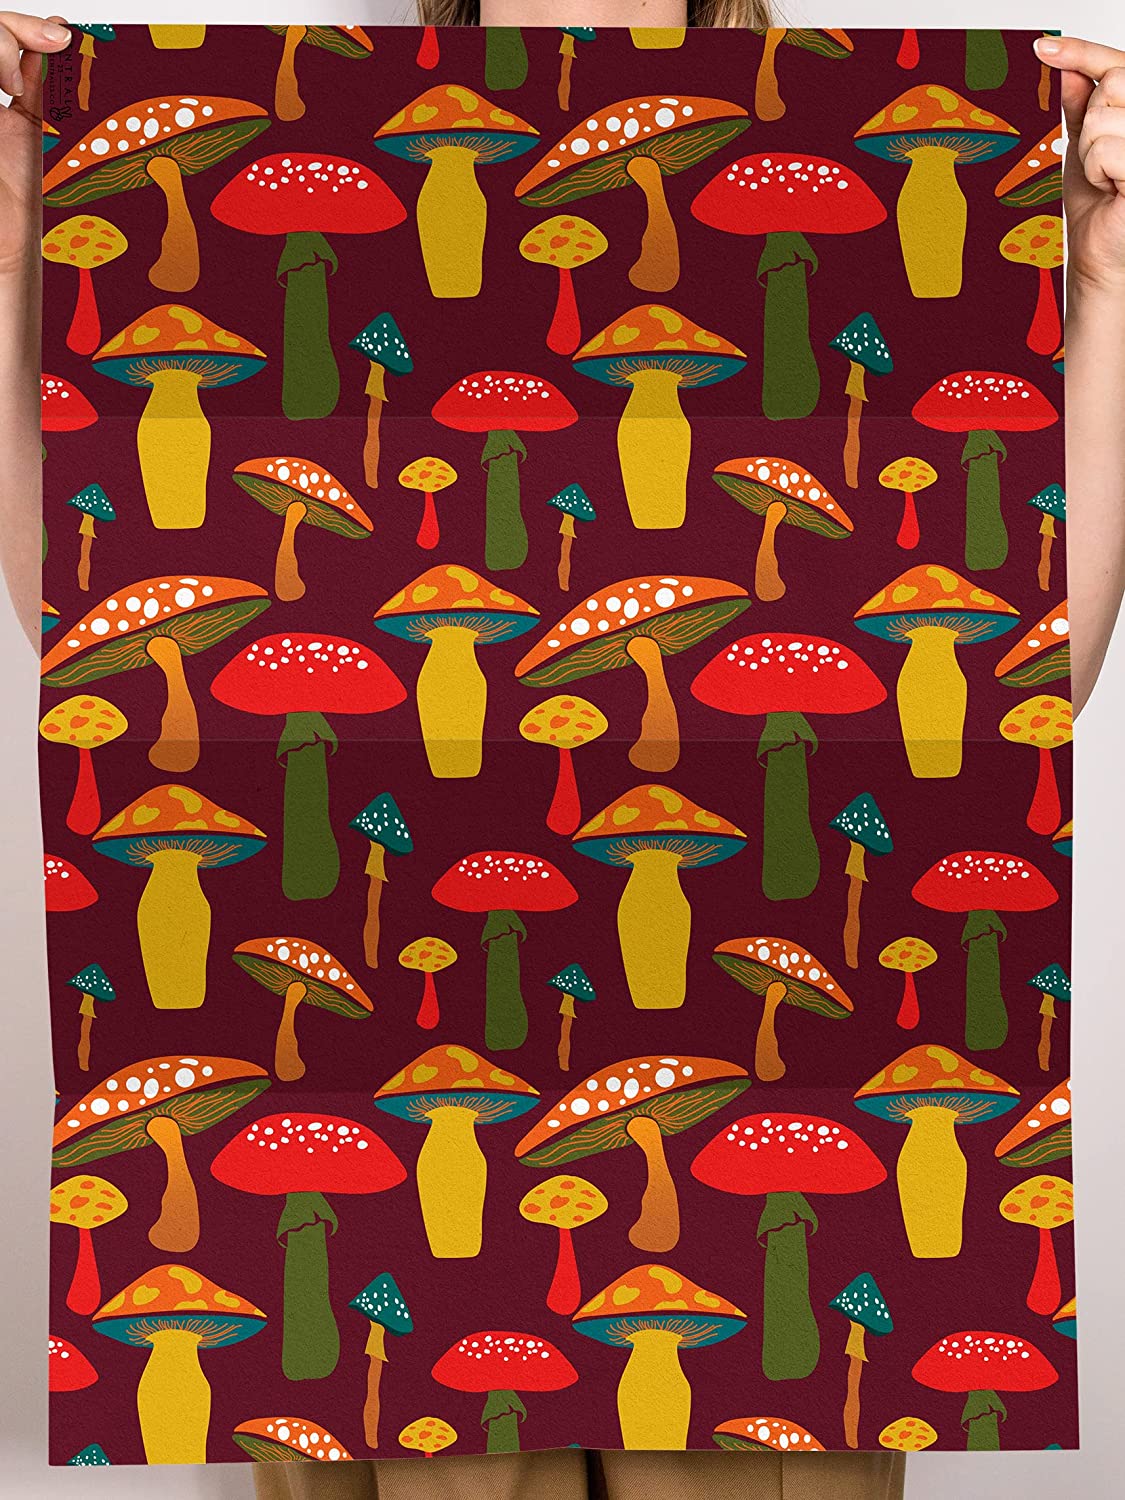 CENTRAL 23 - Red Wrapping Paper - Mushroom Wrapping Paper - Red Yellow -  Vibrant - 6 Sheets Gift Wrap - For Birthday Christmas Holiday - Comes With  Stickers 